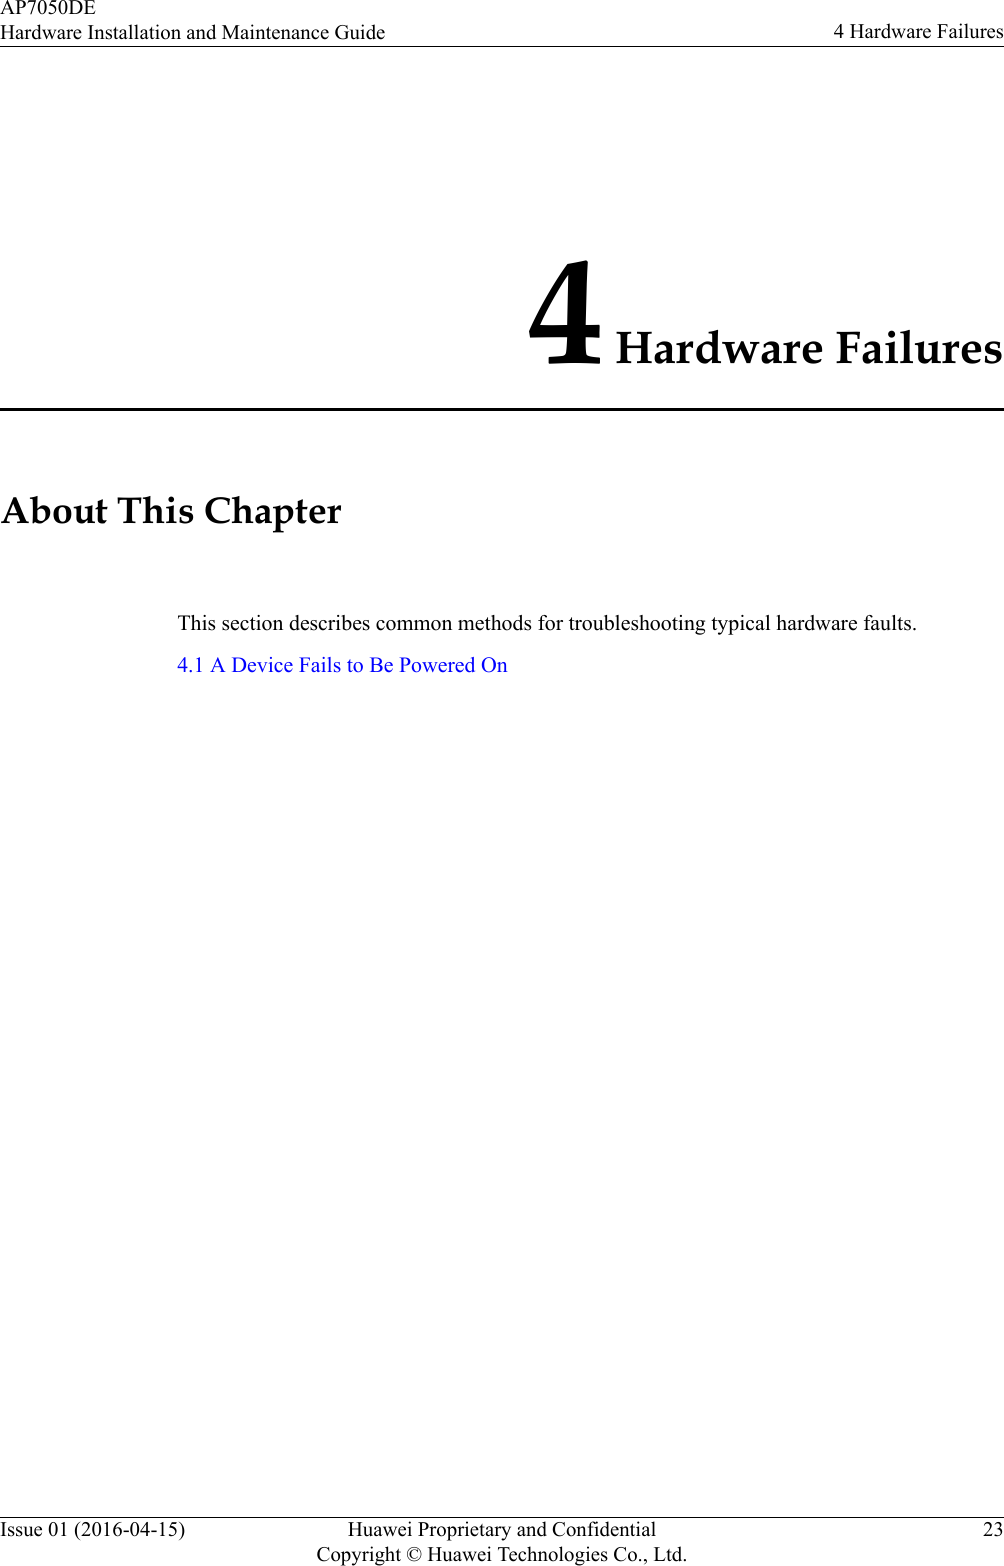 4 Hardware FailuresAbout This ChapterThis section describes common methods for troubleshooting typical hardware faults.4.1 A Device Fails to Be Powered OnAP7050DEHardware Installation and Maintenance Guide 4 Hardware FailuresIssue 01 (2016-04-15) Huawei Proprietary and ConfidentialCopyright © Huawei Technologies Co., Ltd.23